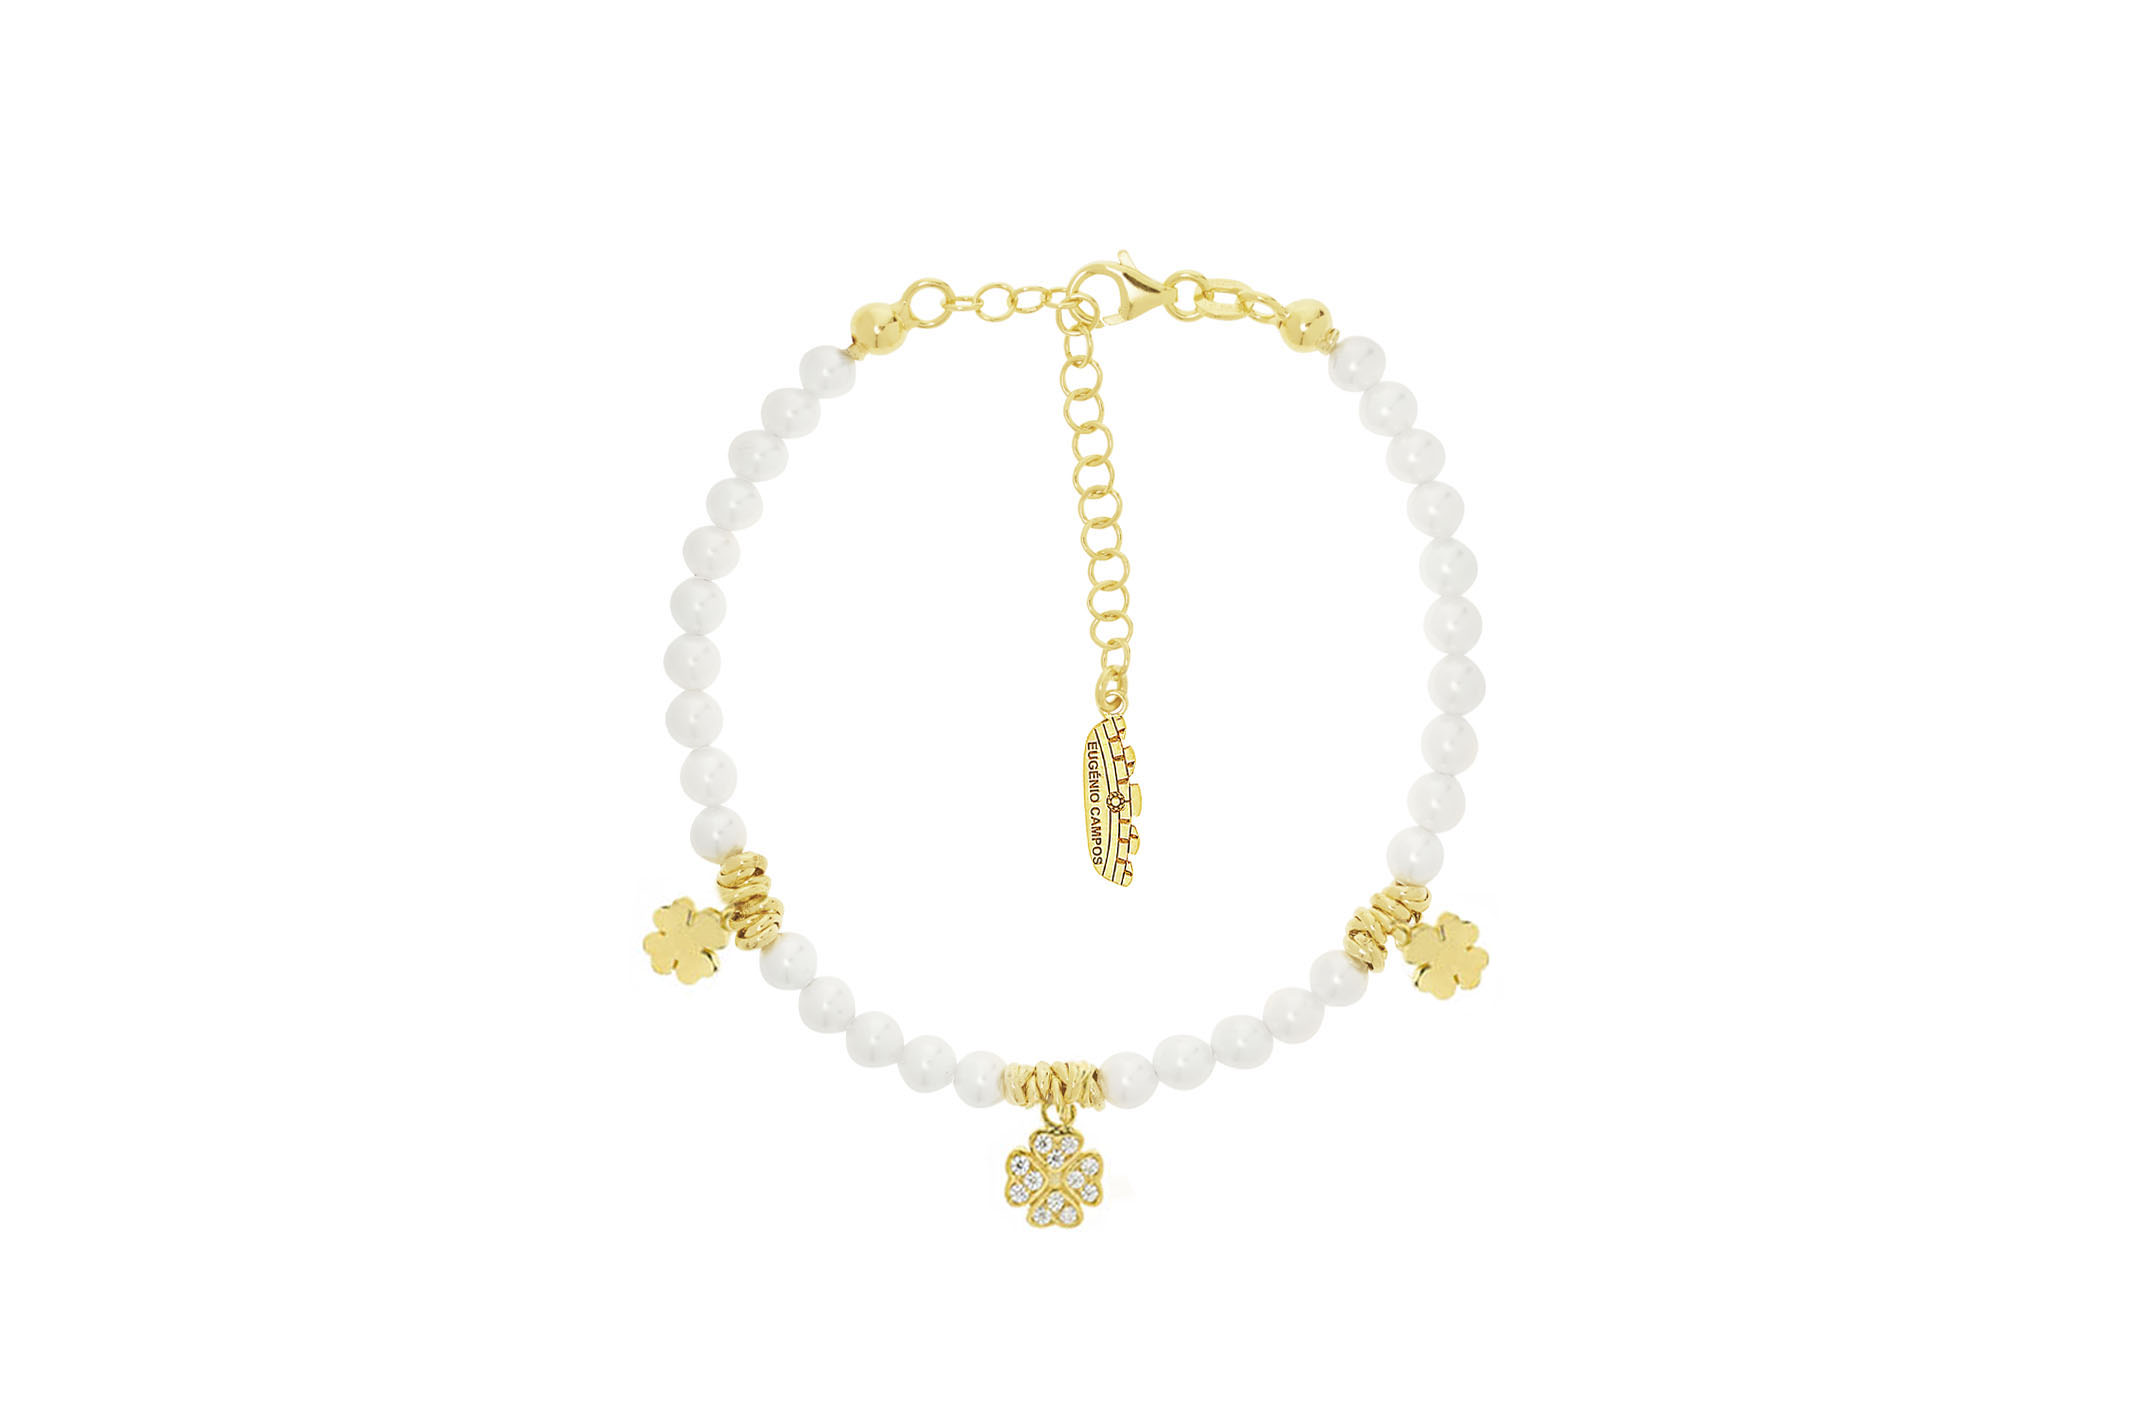 Jewel: bracelet;Material: silver 925;Weight: 11.4 gr;Stone: pearl & zirconia;Color: yellow;Size: 16 cm + 5 cm;Pendent size: 0.5 cm